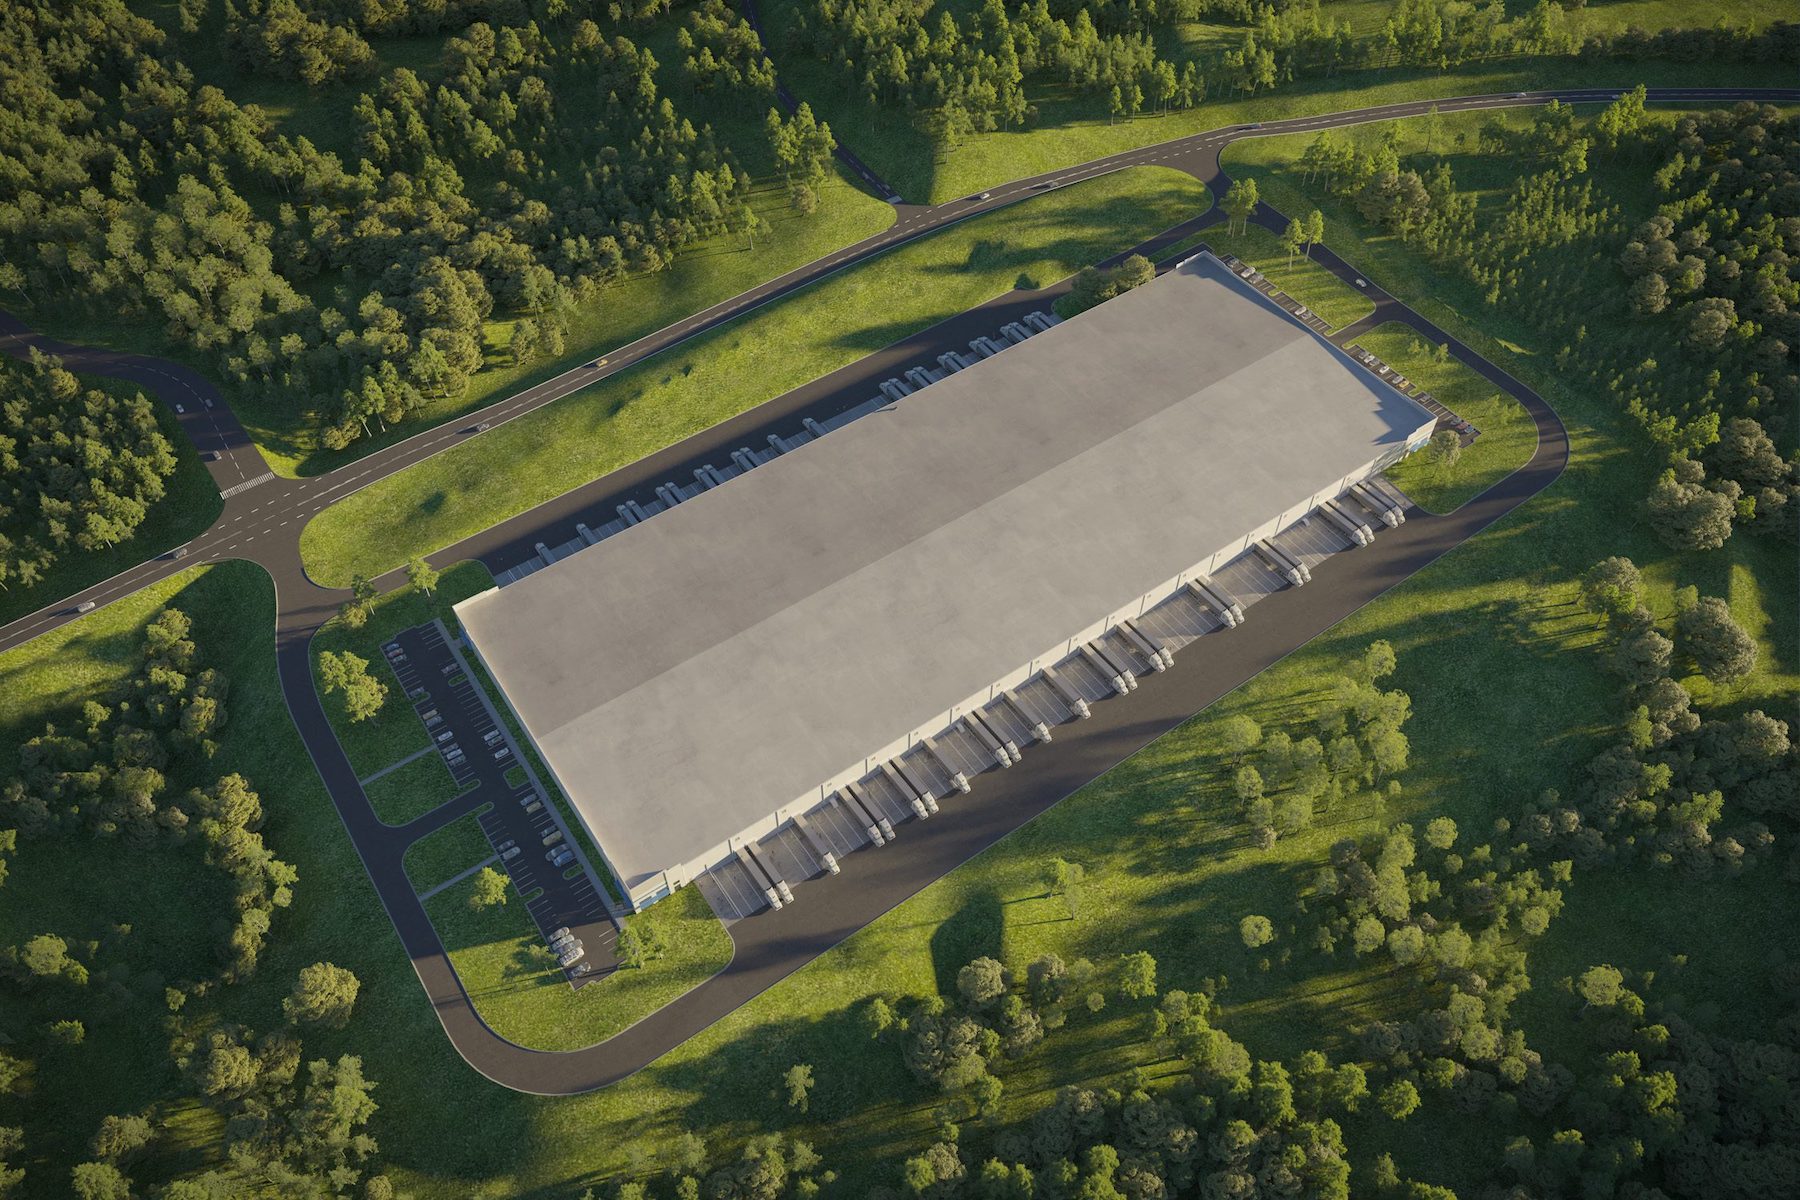 The Logistics Center will have access to I-85.